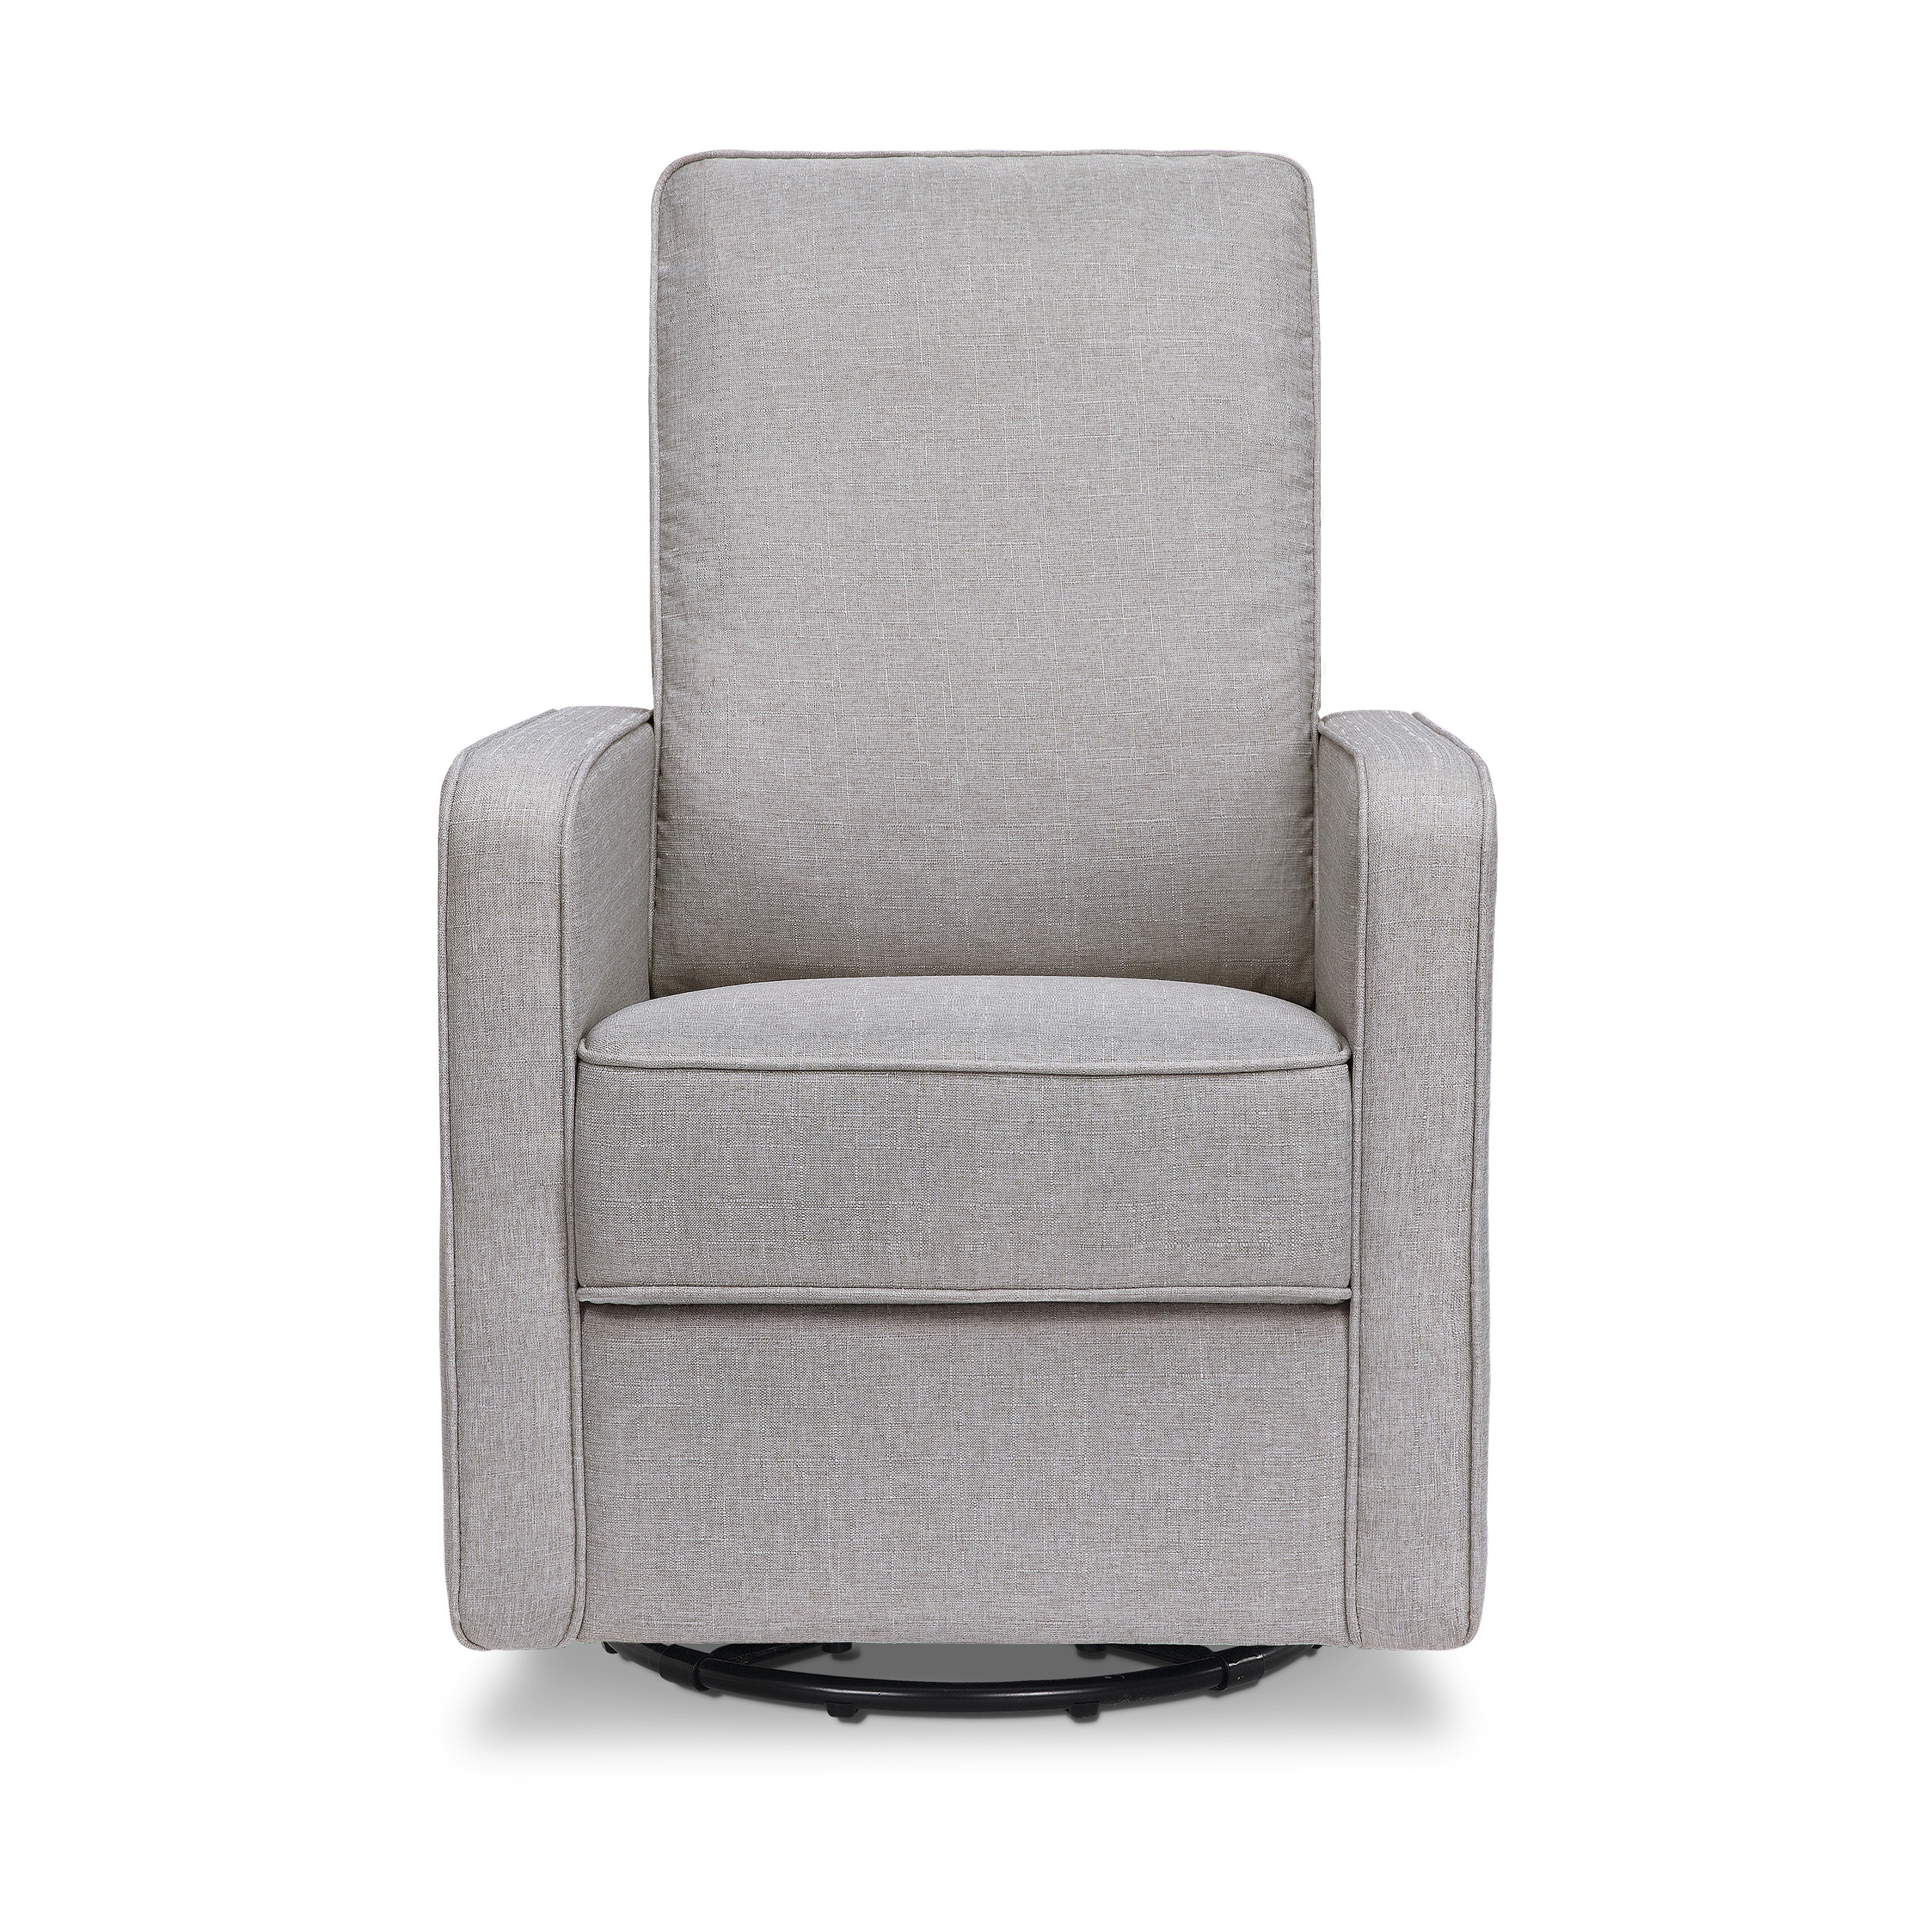 DaVinci Casey Pillowback Swivel Glider Chair in Misty Gray - image 3 of 7